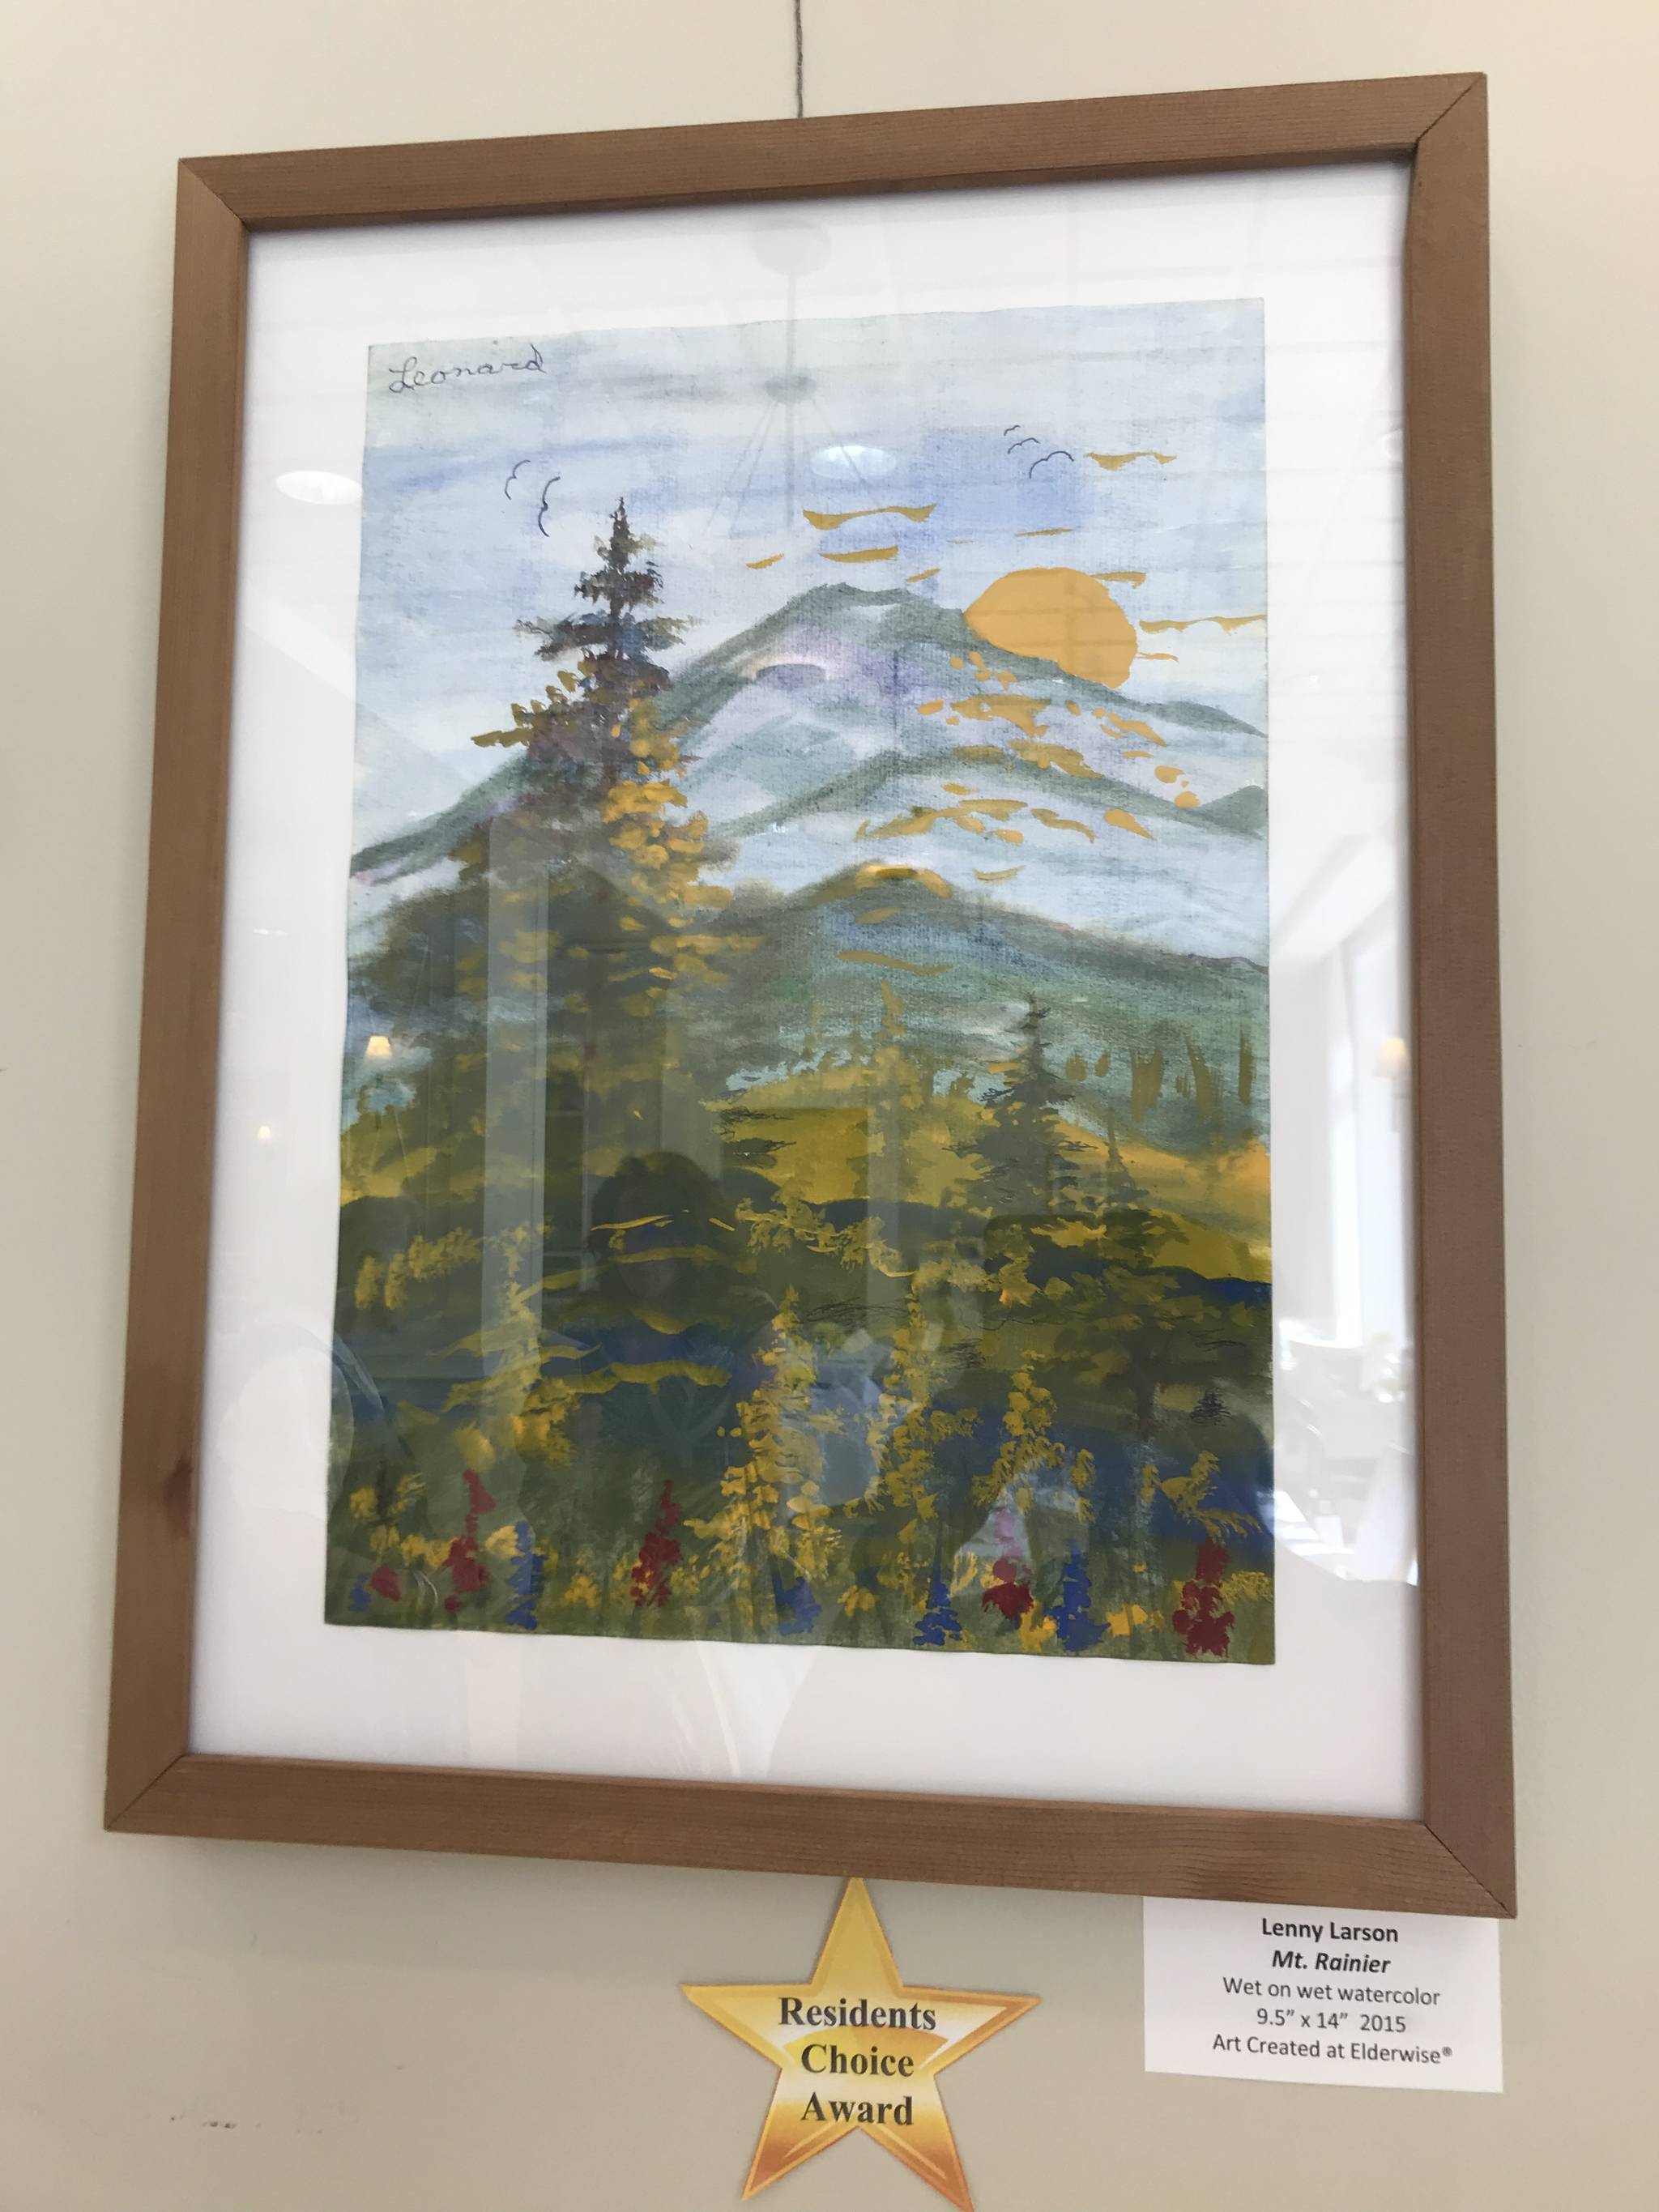 Lenny Larson’s painting, “Mt. Rainier,” received the Residents Choice Award at The Gardens at Town Square, where it is currently on display as part of “The Art of Alzheimer’s.”